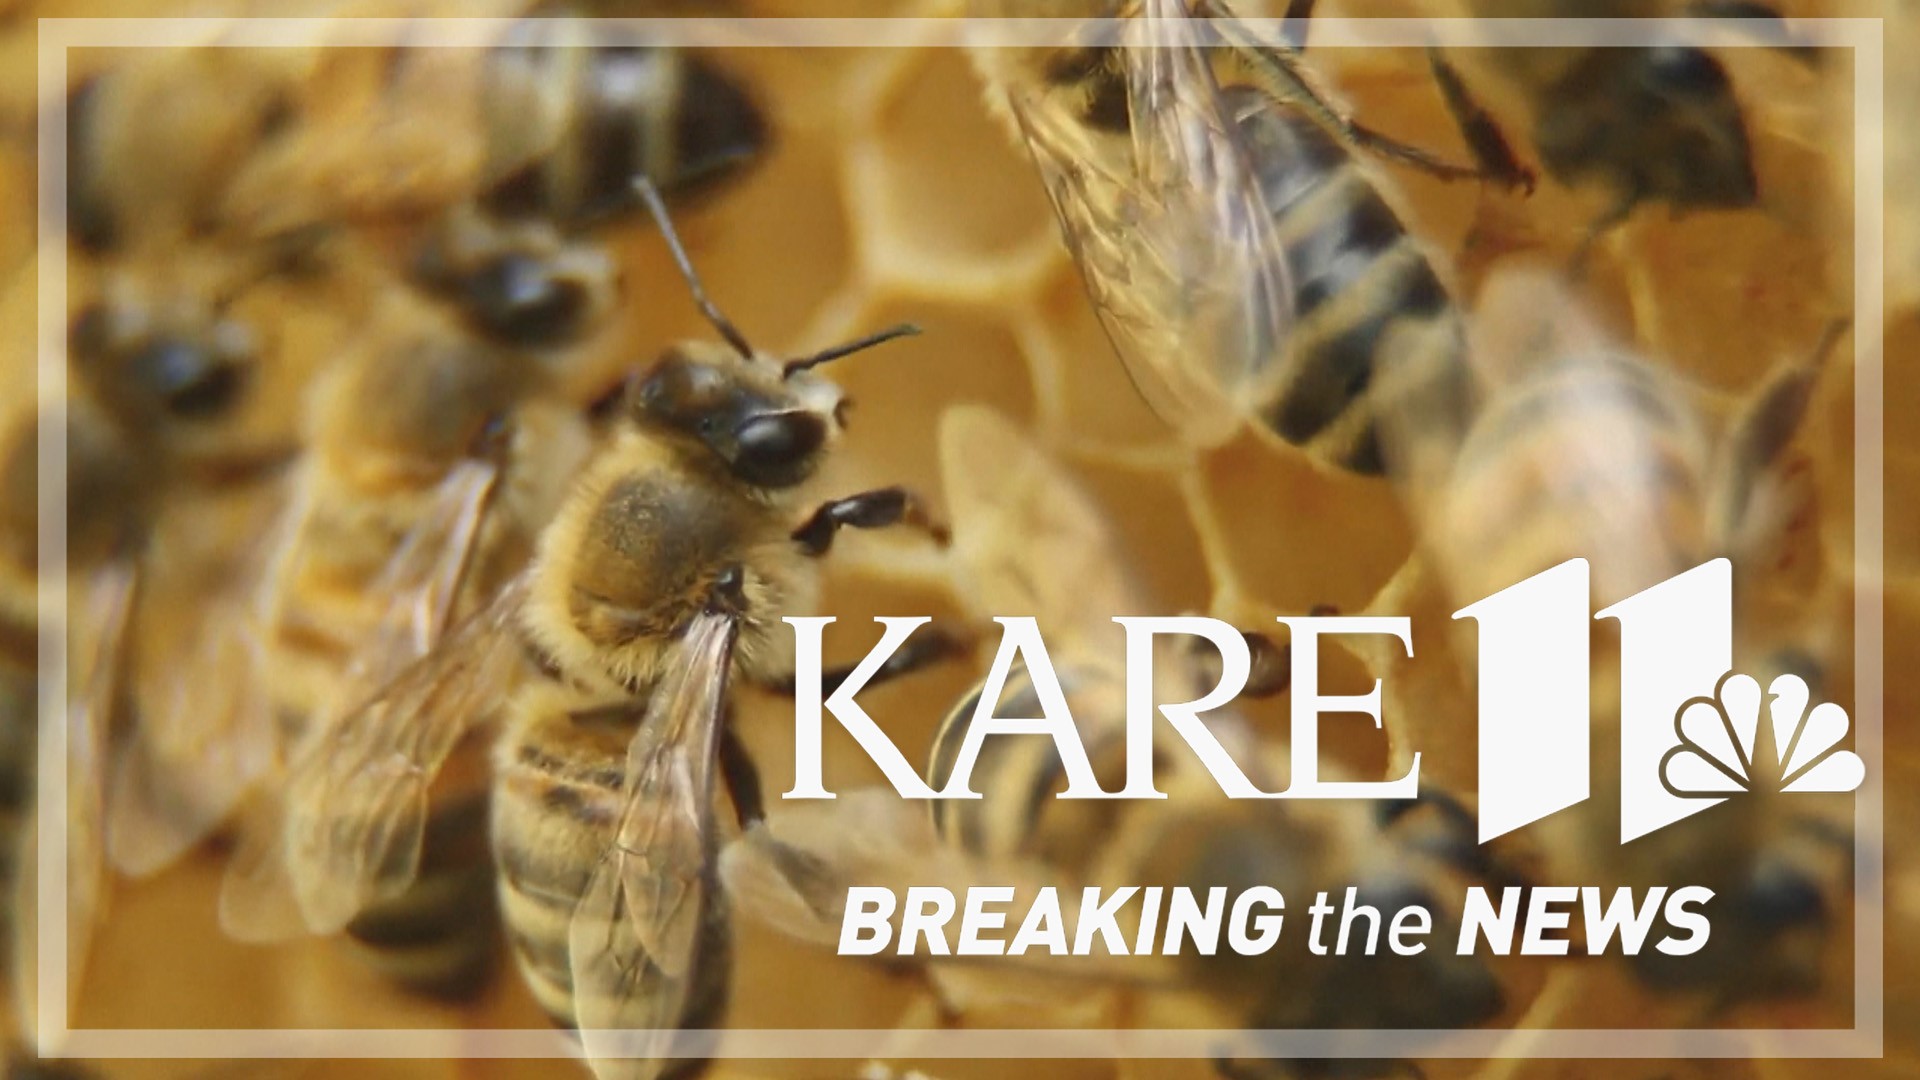 The new vaccine was created by Dalan Animal Health and it’s the first ever bee vaccine approved by the USDA.